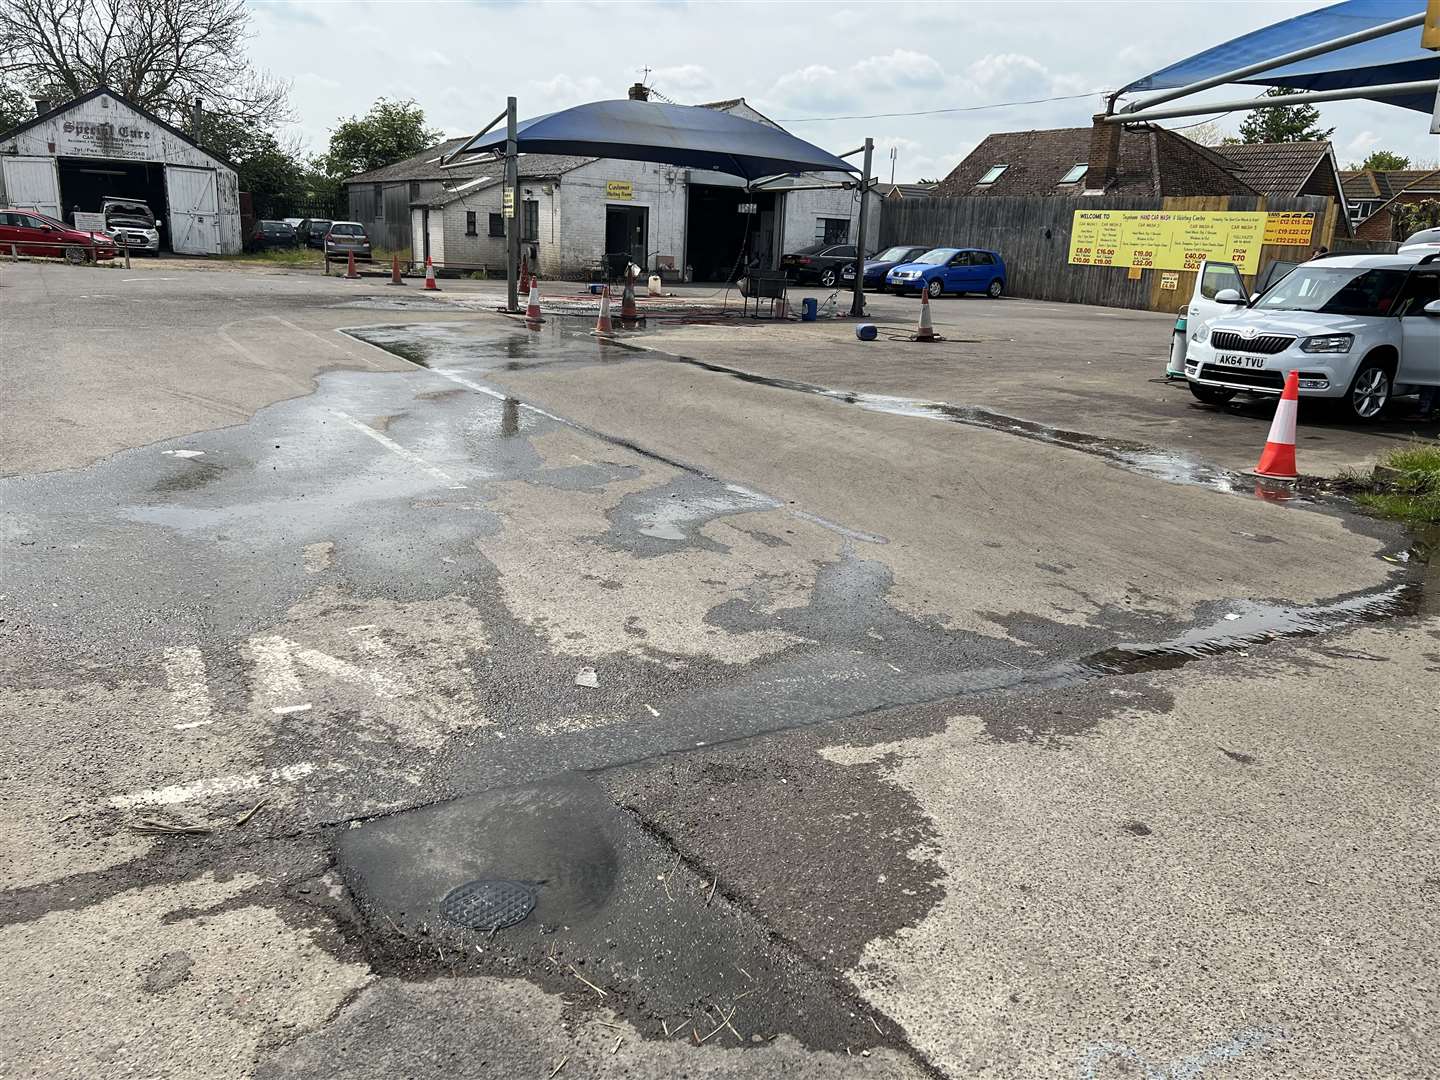 The leaking access cover outside Teynham Hand Car Wash is causing problems for the business